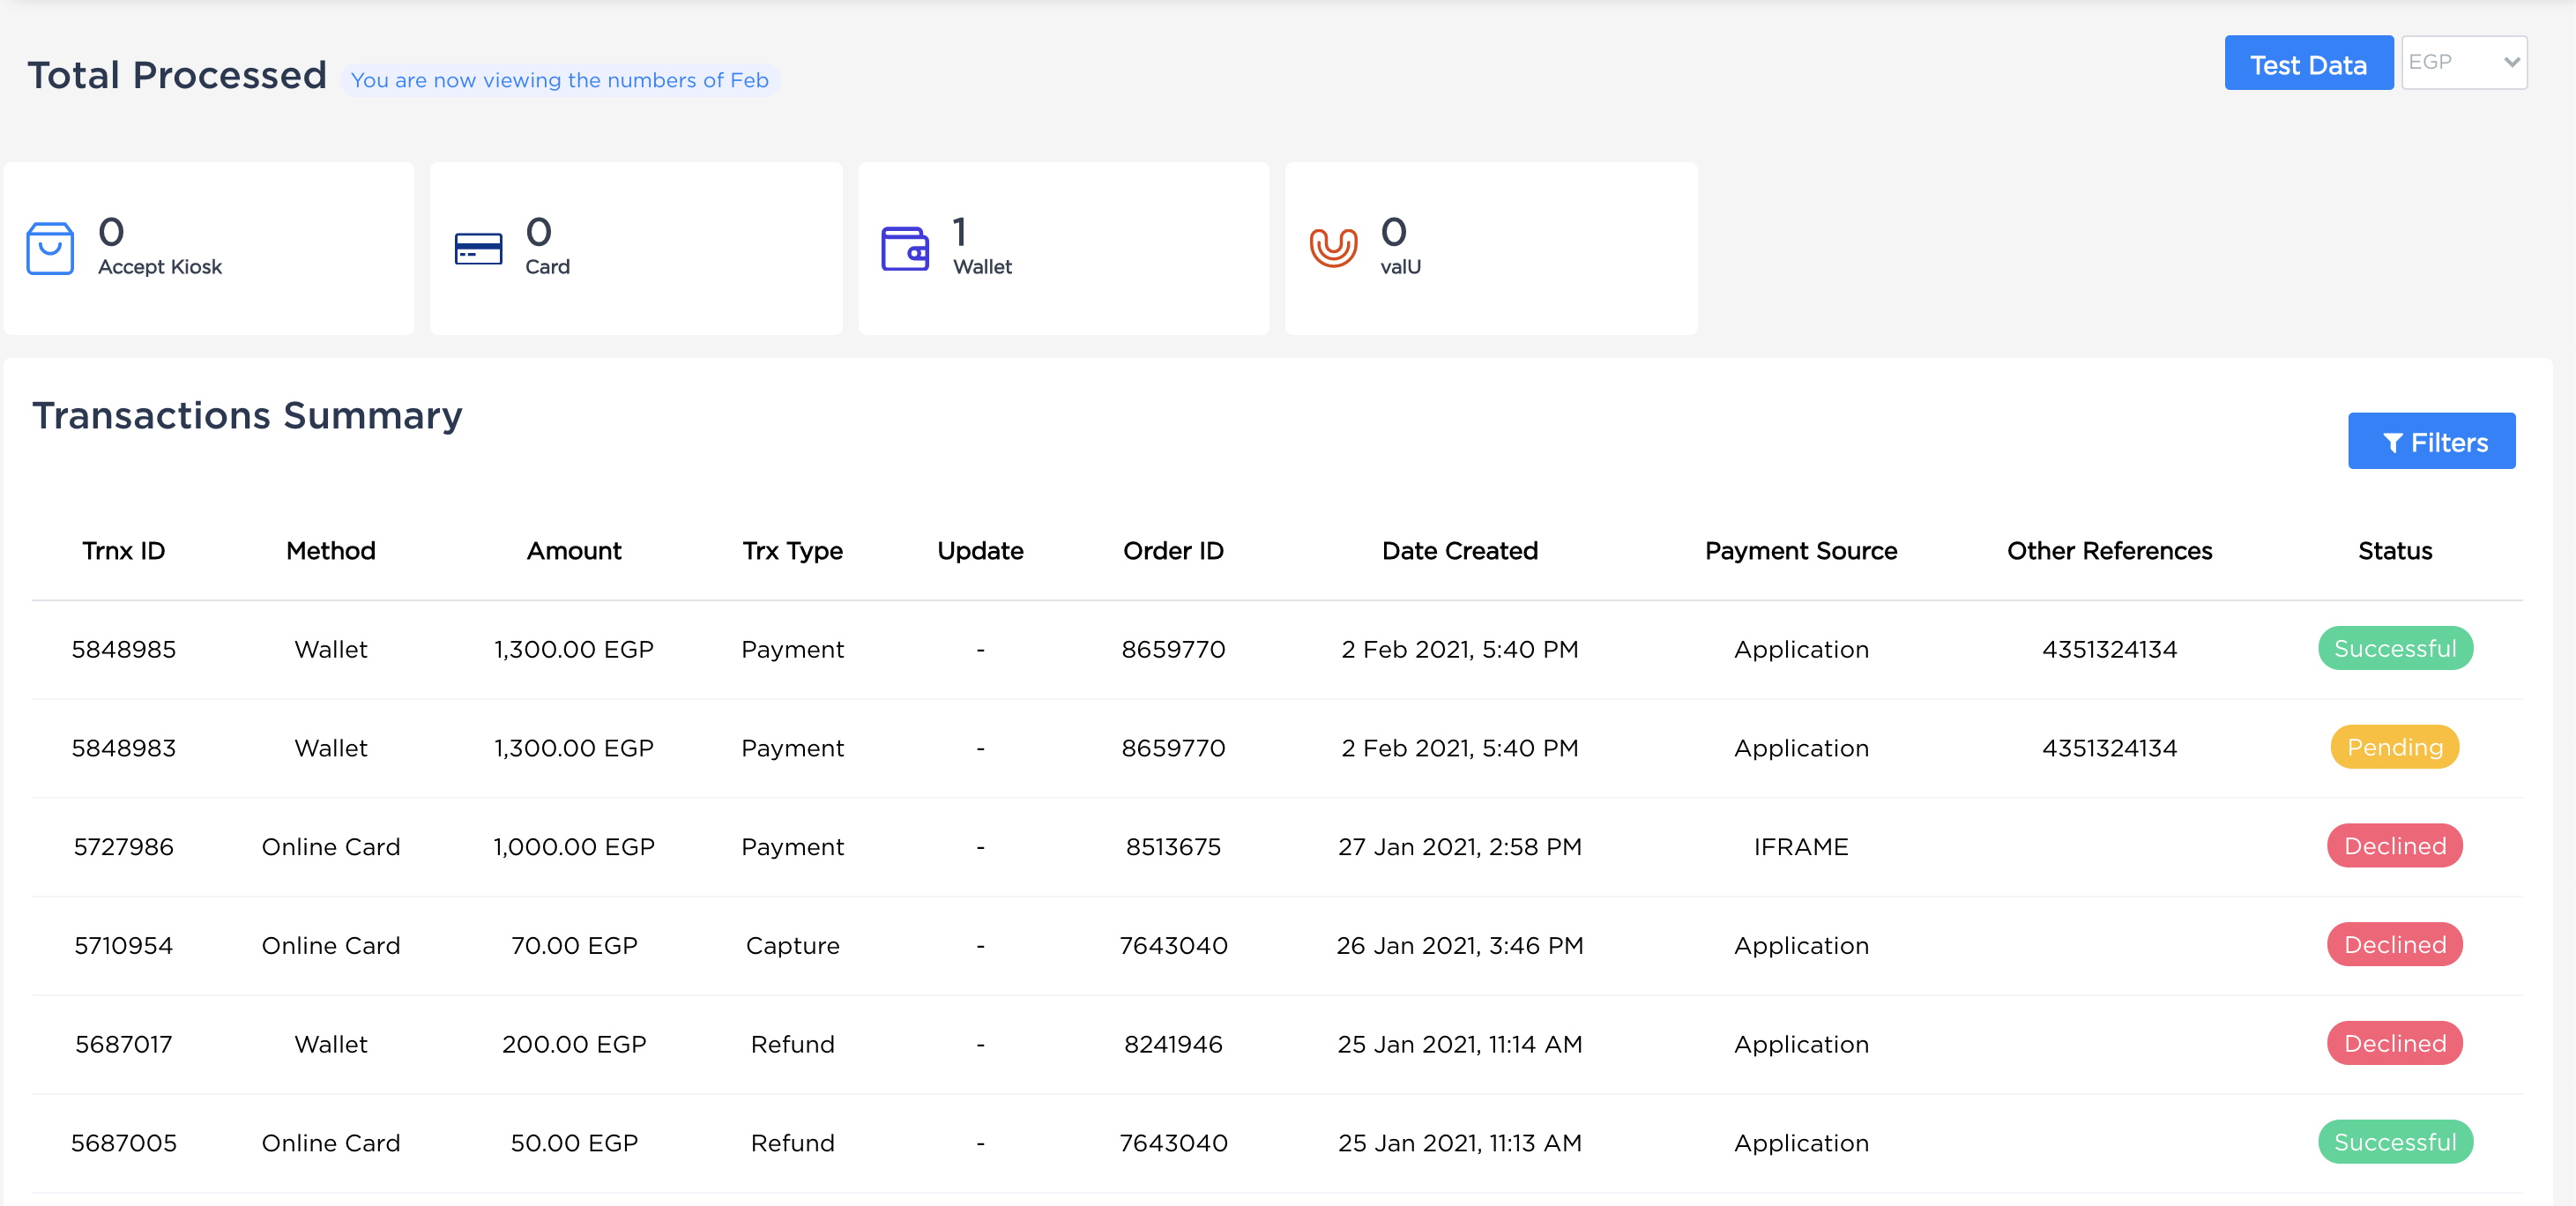 Accept Dashboard - Transactions Tab.